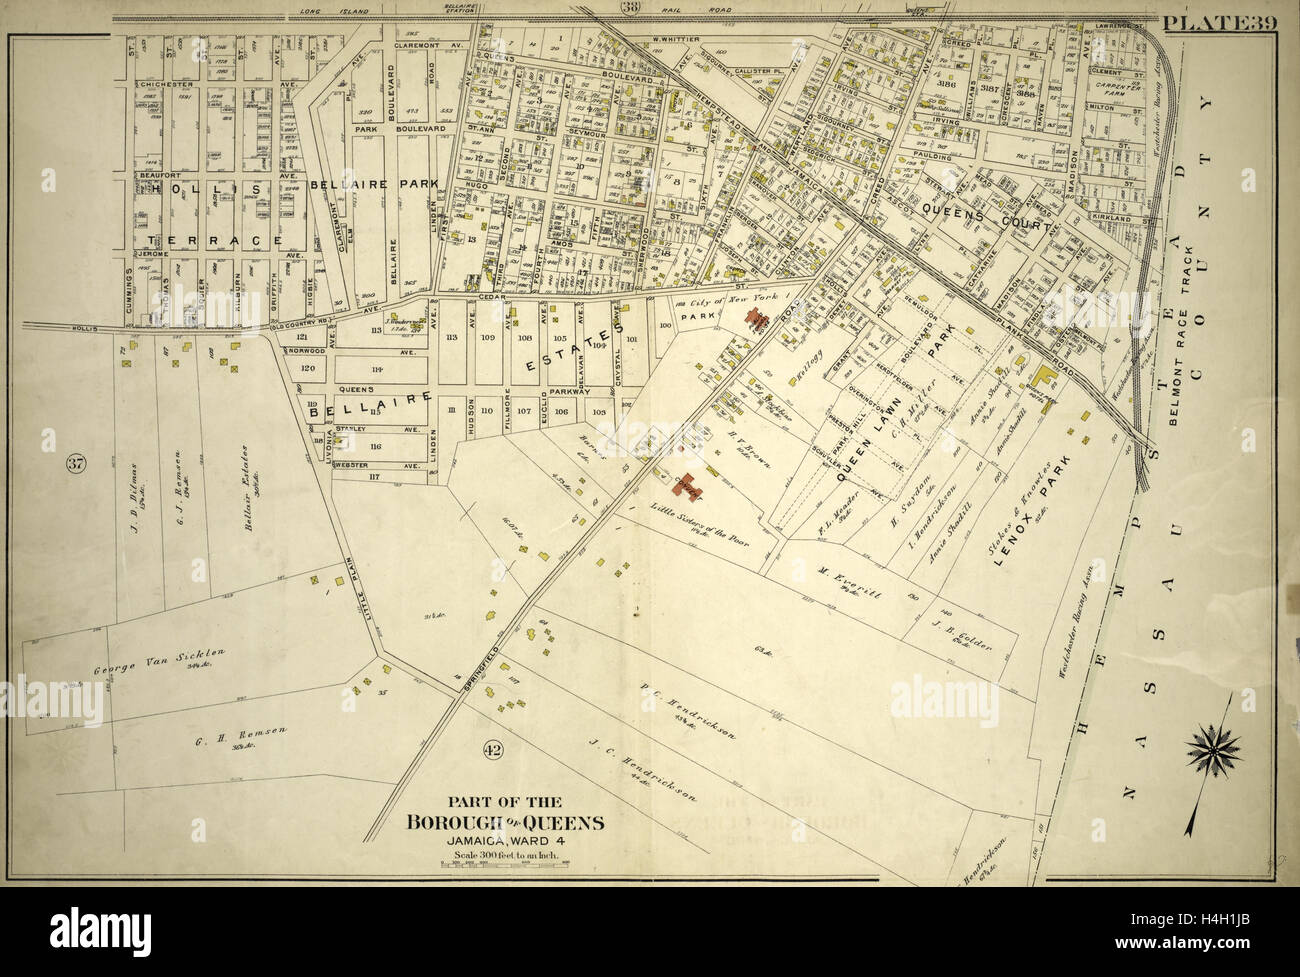 Plate 39: Bounded by Chichester Ave., Claremont Ave., Queens Blvd., Hempstead and Jamaica Plank Rd., W. Whittier St. Stock Photo